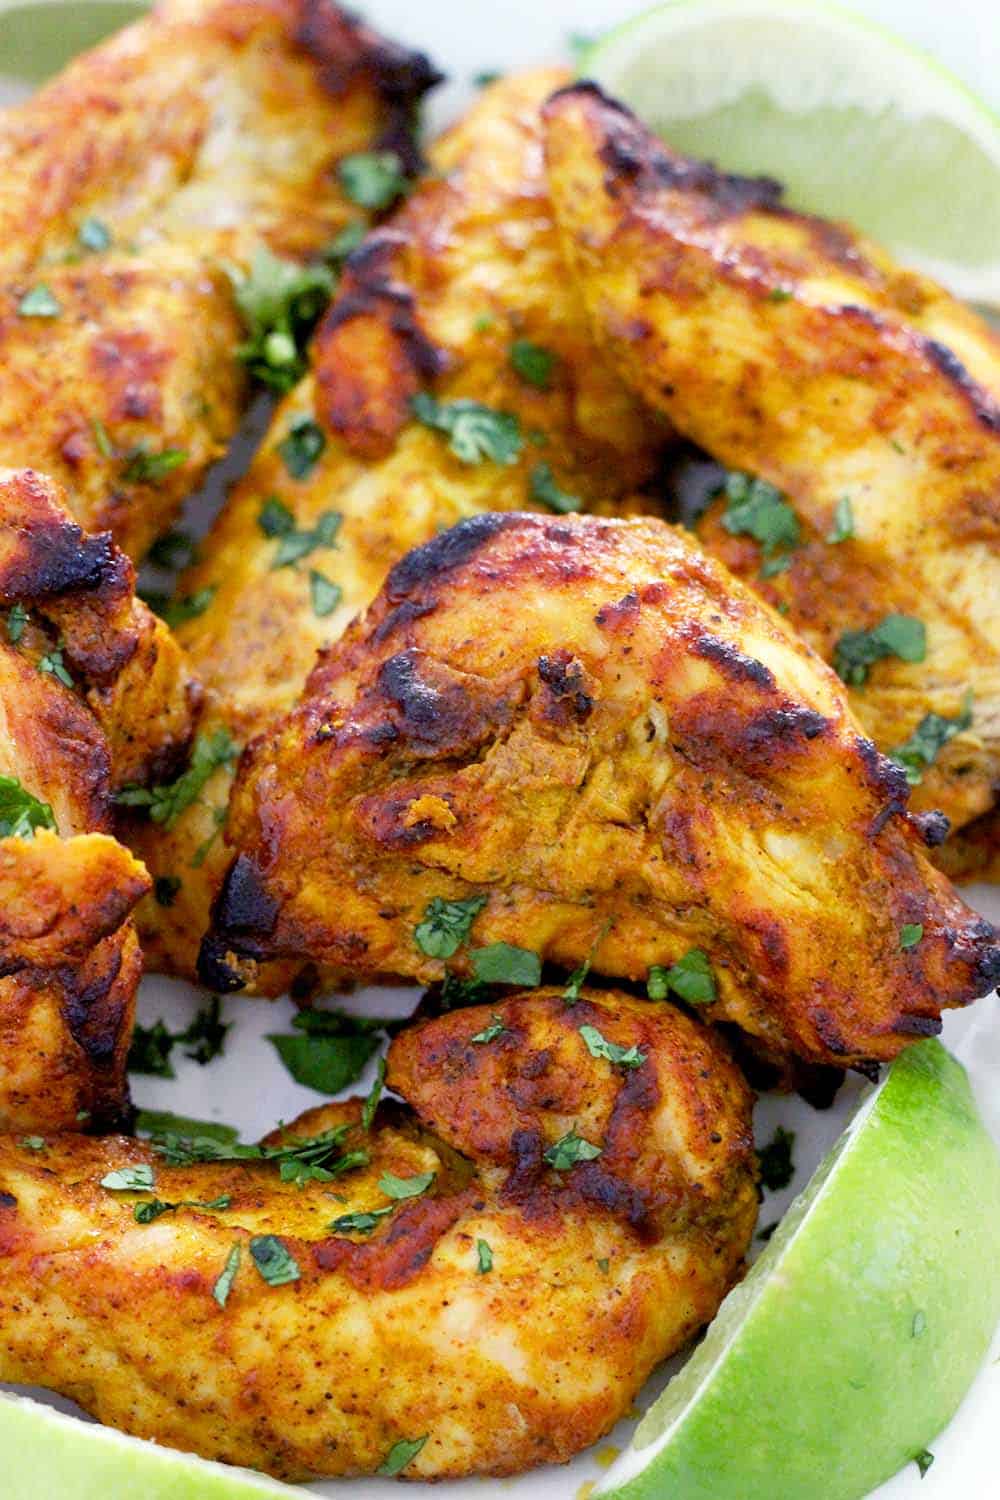 This Oven Broiled Tandoori Chicken is super flavorful, charred, and smoky- just like at your favorite Indian restaurant! This healthy, low carb recipe takes only 20 minutes to cook and is perfect on its own or in your favorite Indian chicken dish.